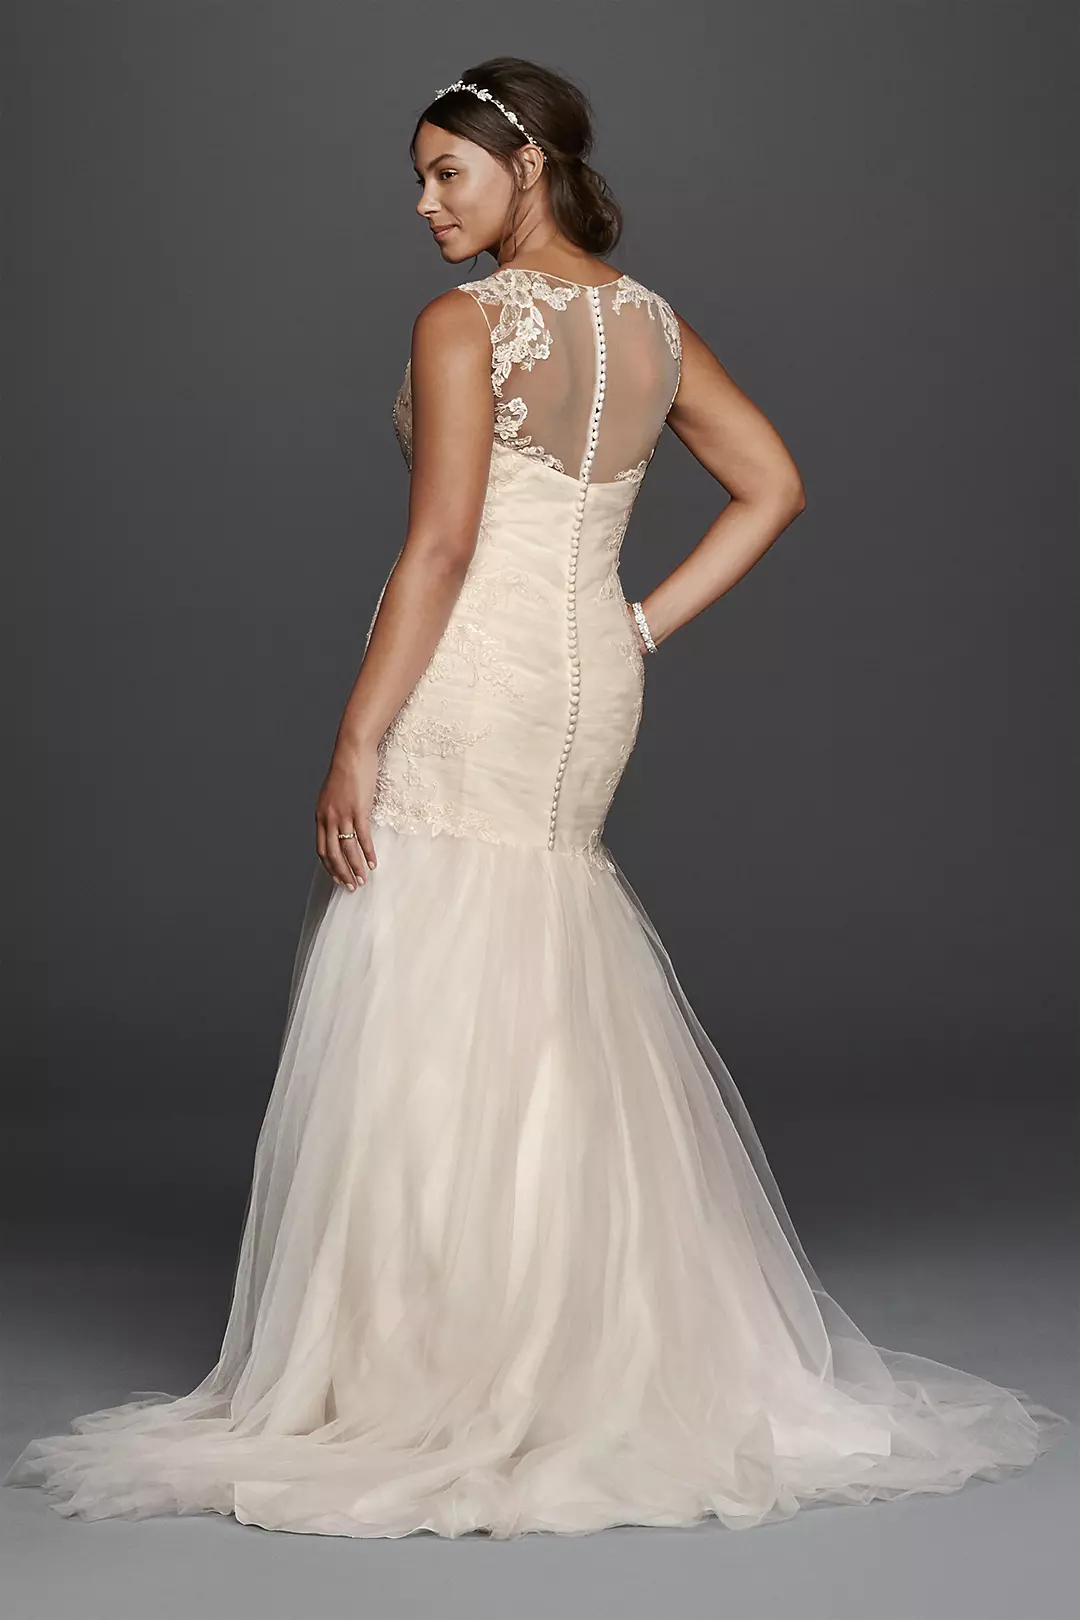 Tulle Trumpet with Illusion Back Wedding Dress Image 2